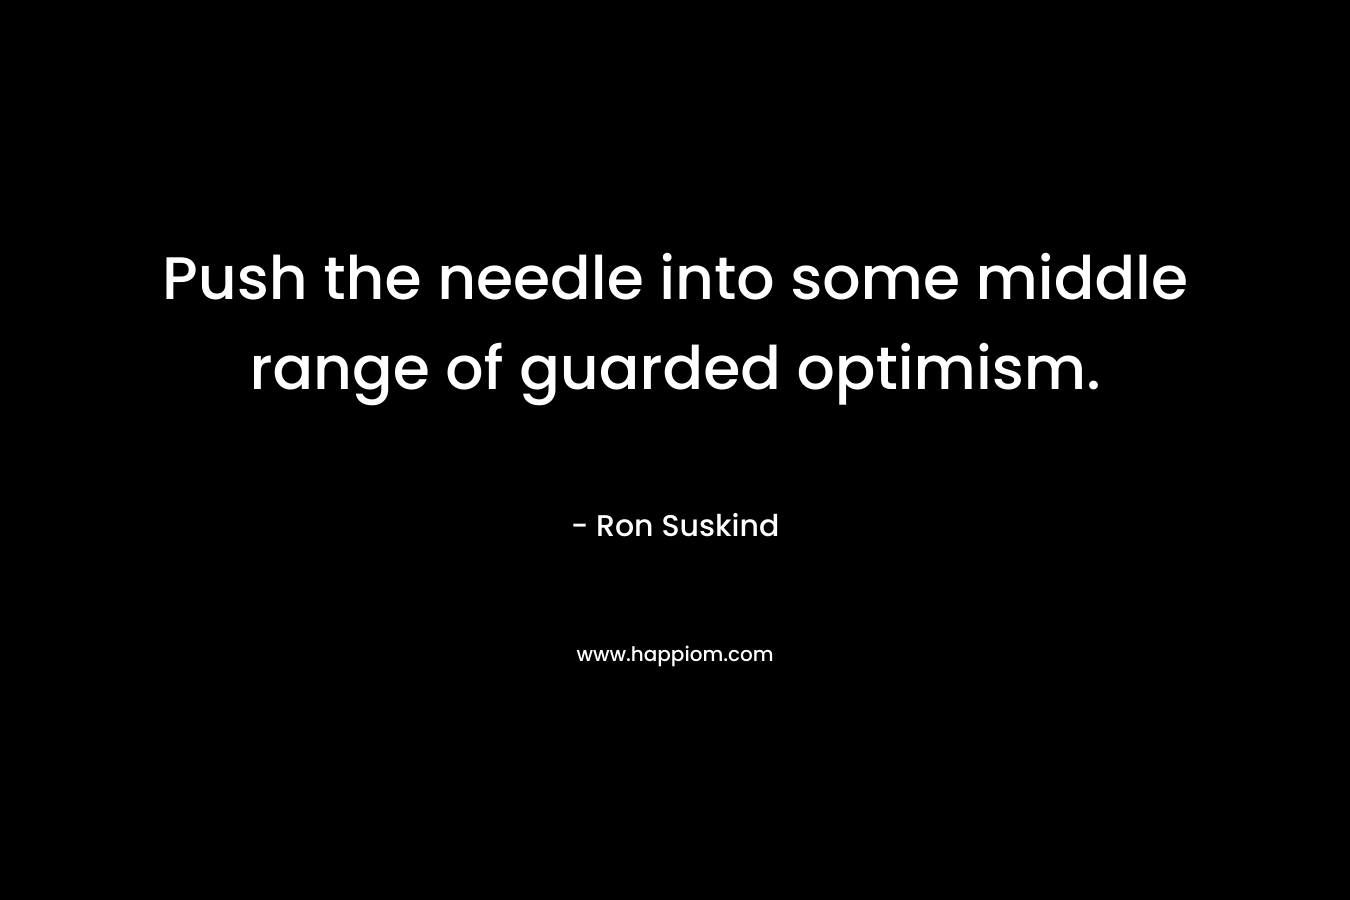 Push the needle into some middle range of guarded optimism. – Ron Suskind